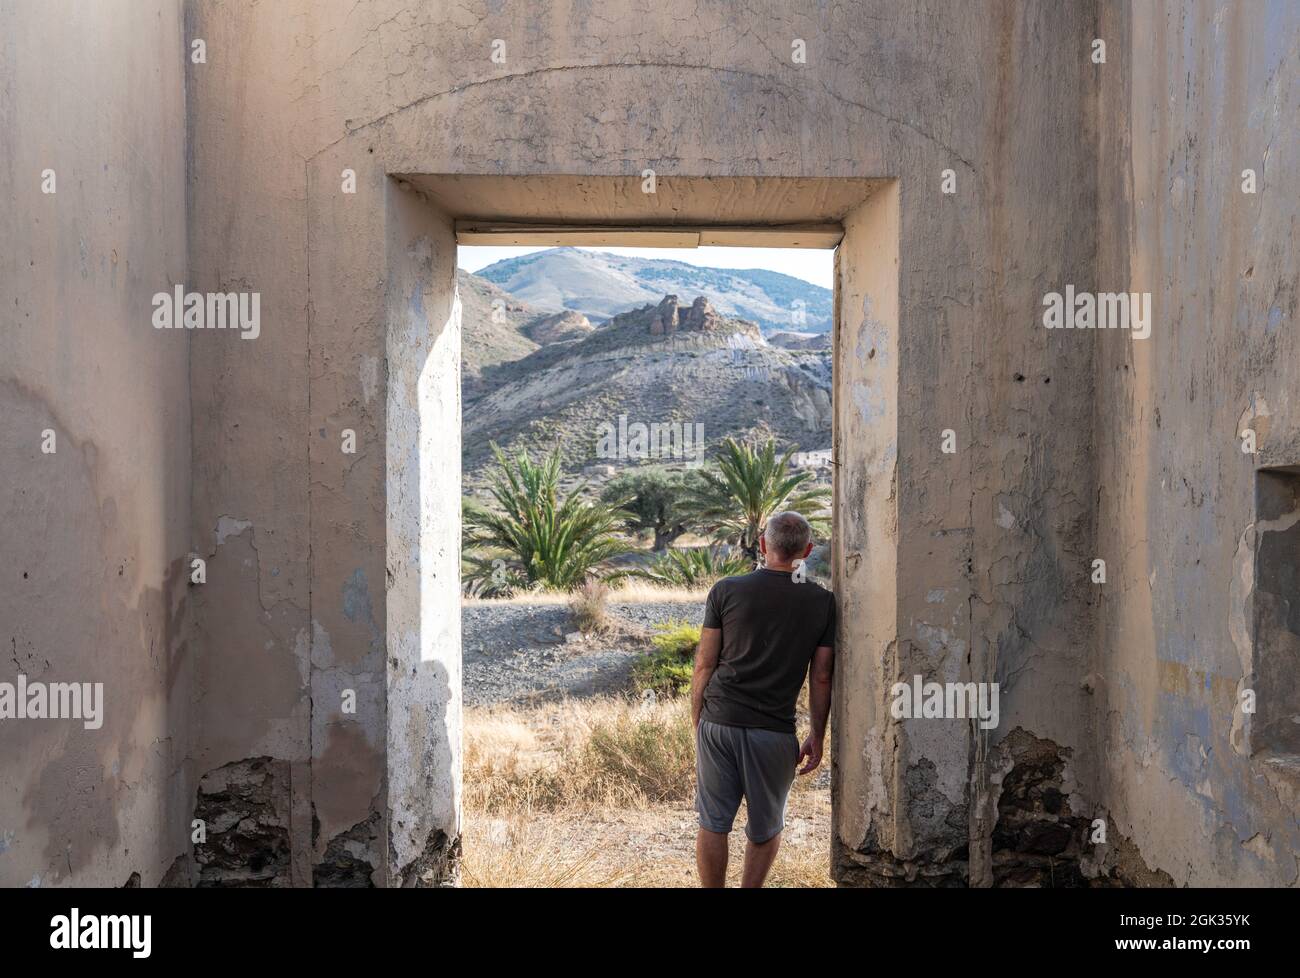 Rear view of adult man standing in doorway of an abandoned house looking at view Stock Photo